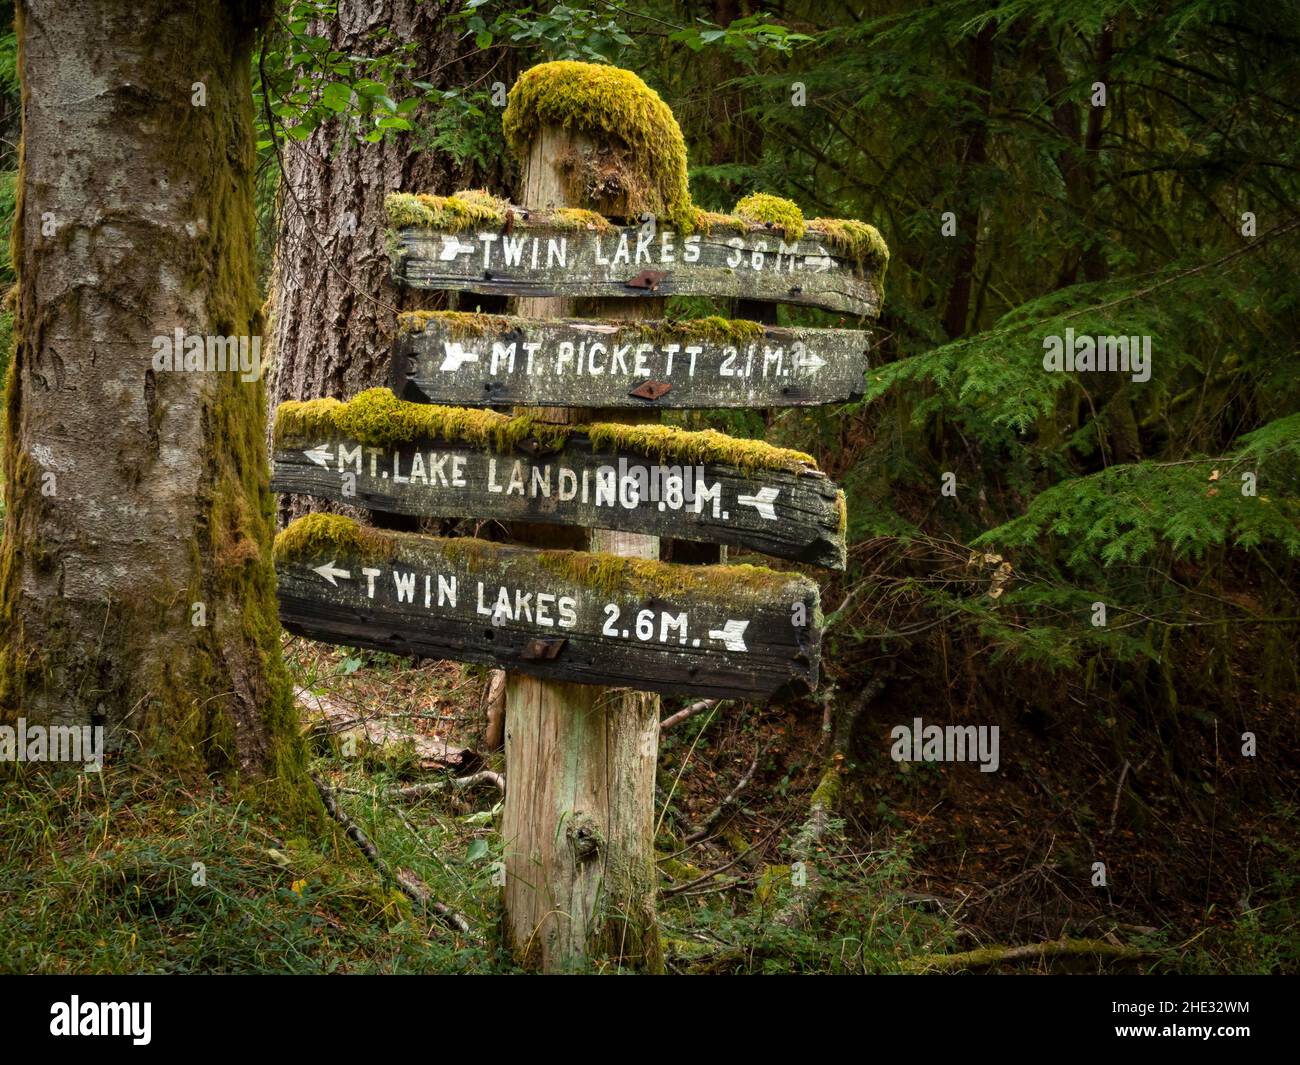 WA21032-00...WASHINGTON - Moss covered trail sign in the forest at Moran State Park on Orcas Island; one of the San Juan Islands. Stock Photo